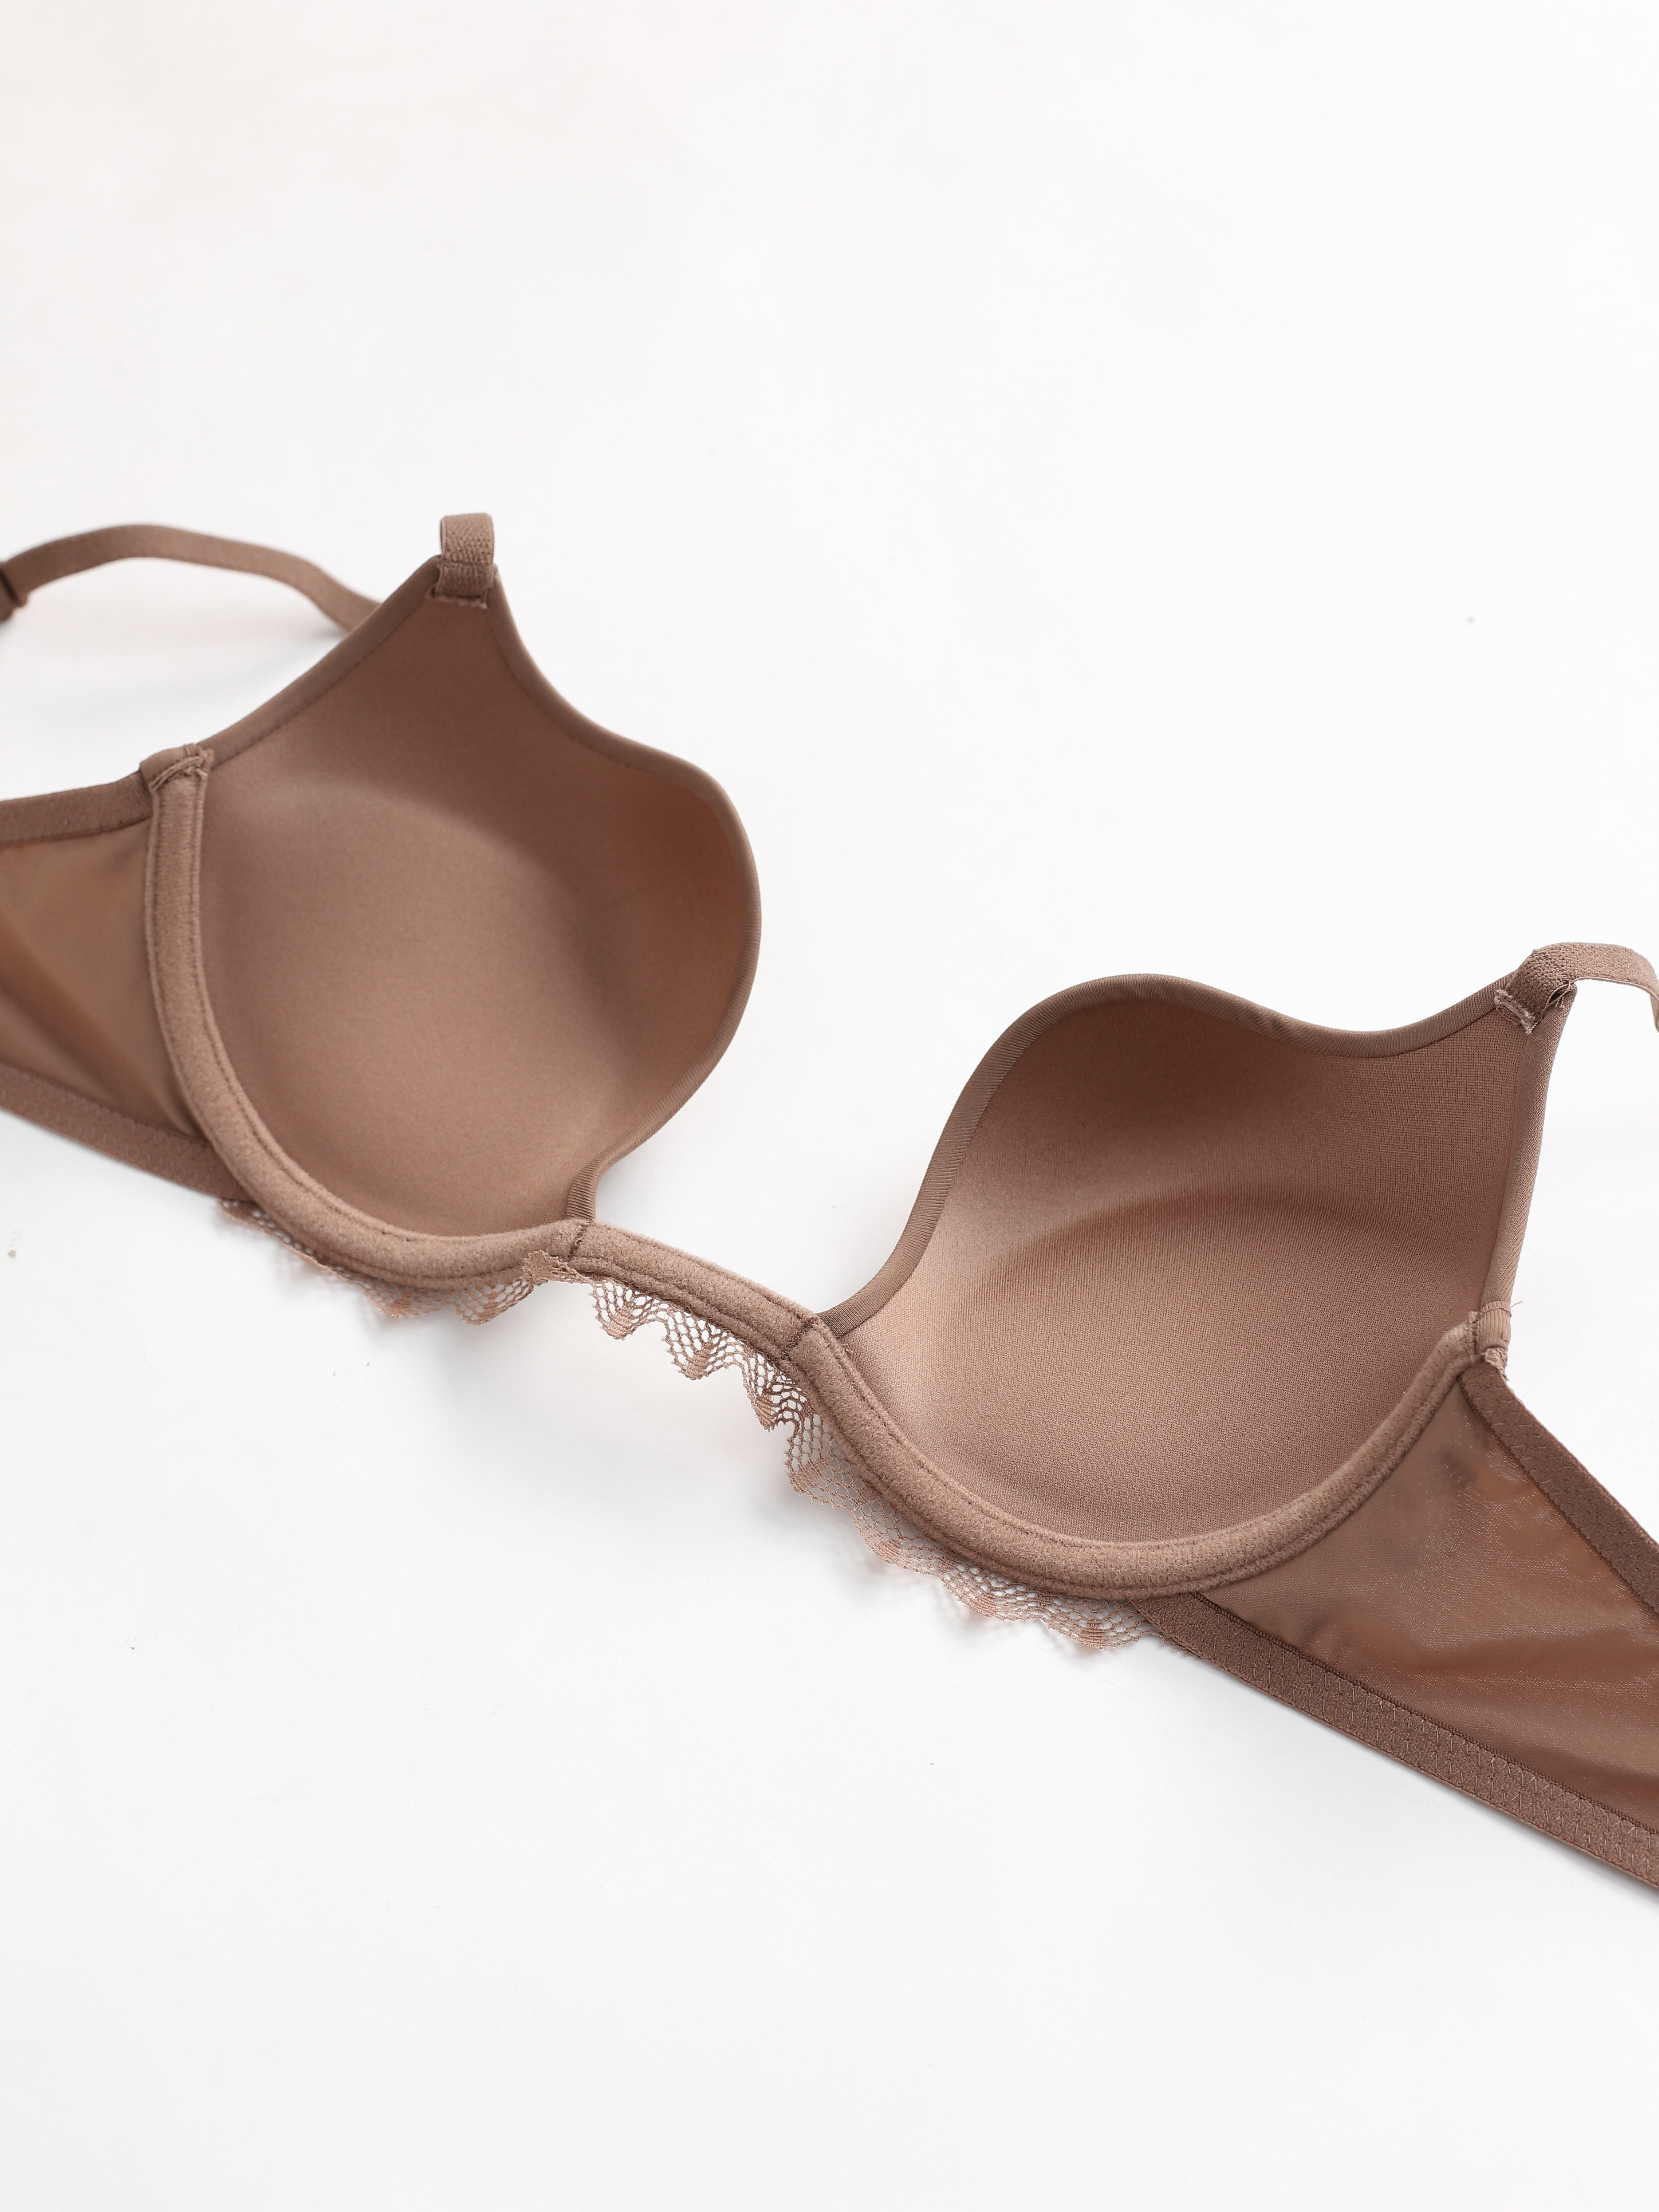 Buy Smooth Push-up Bra - Lace Side Trims - 1630 (36C, Brown